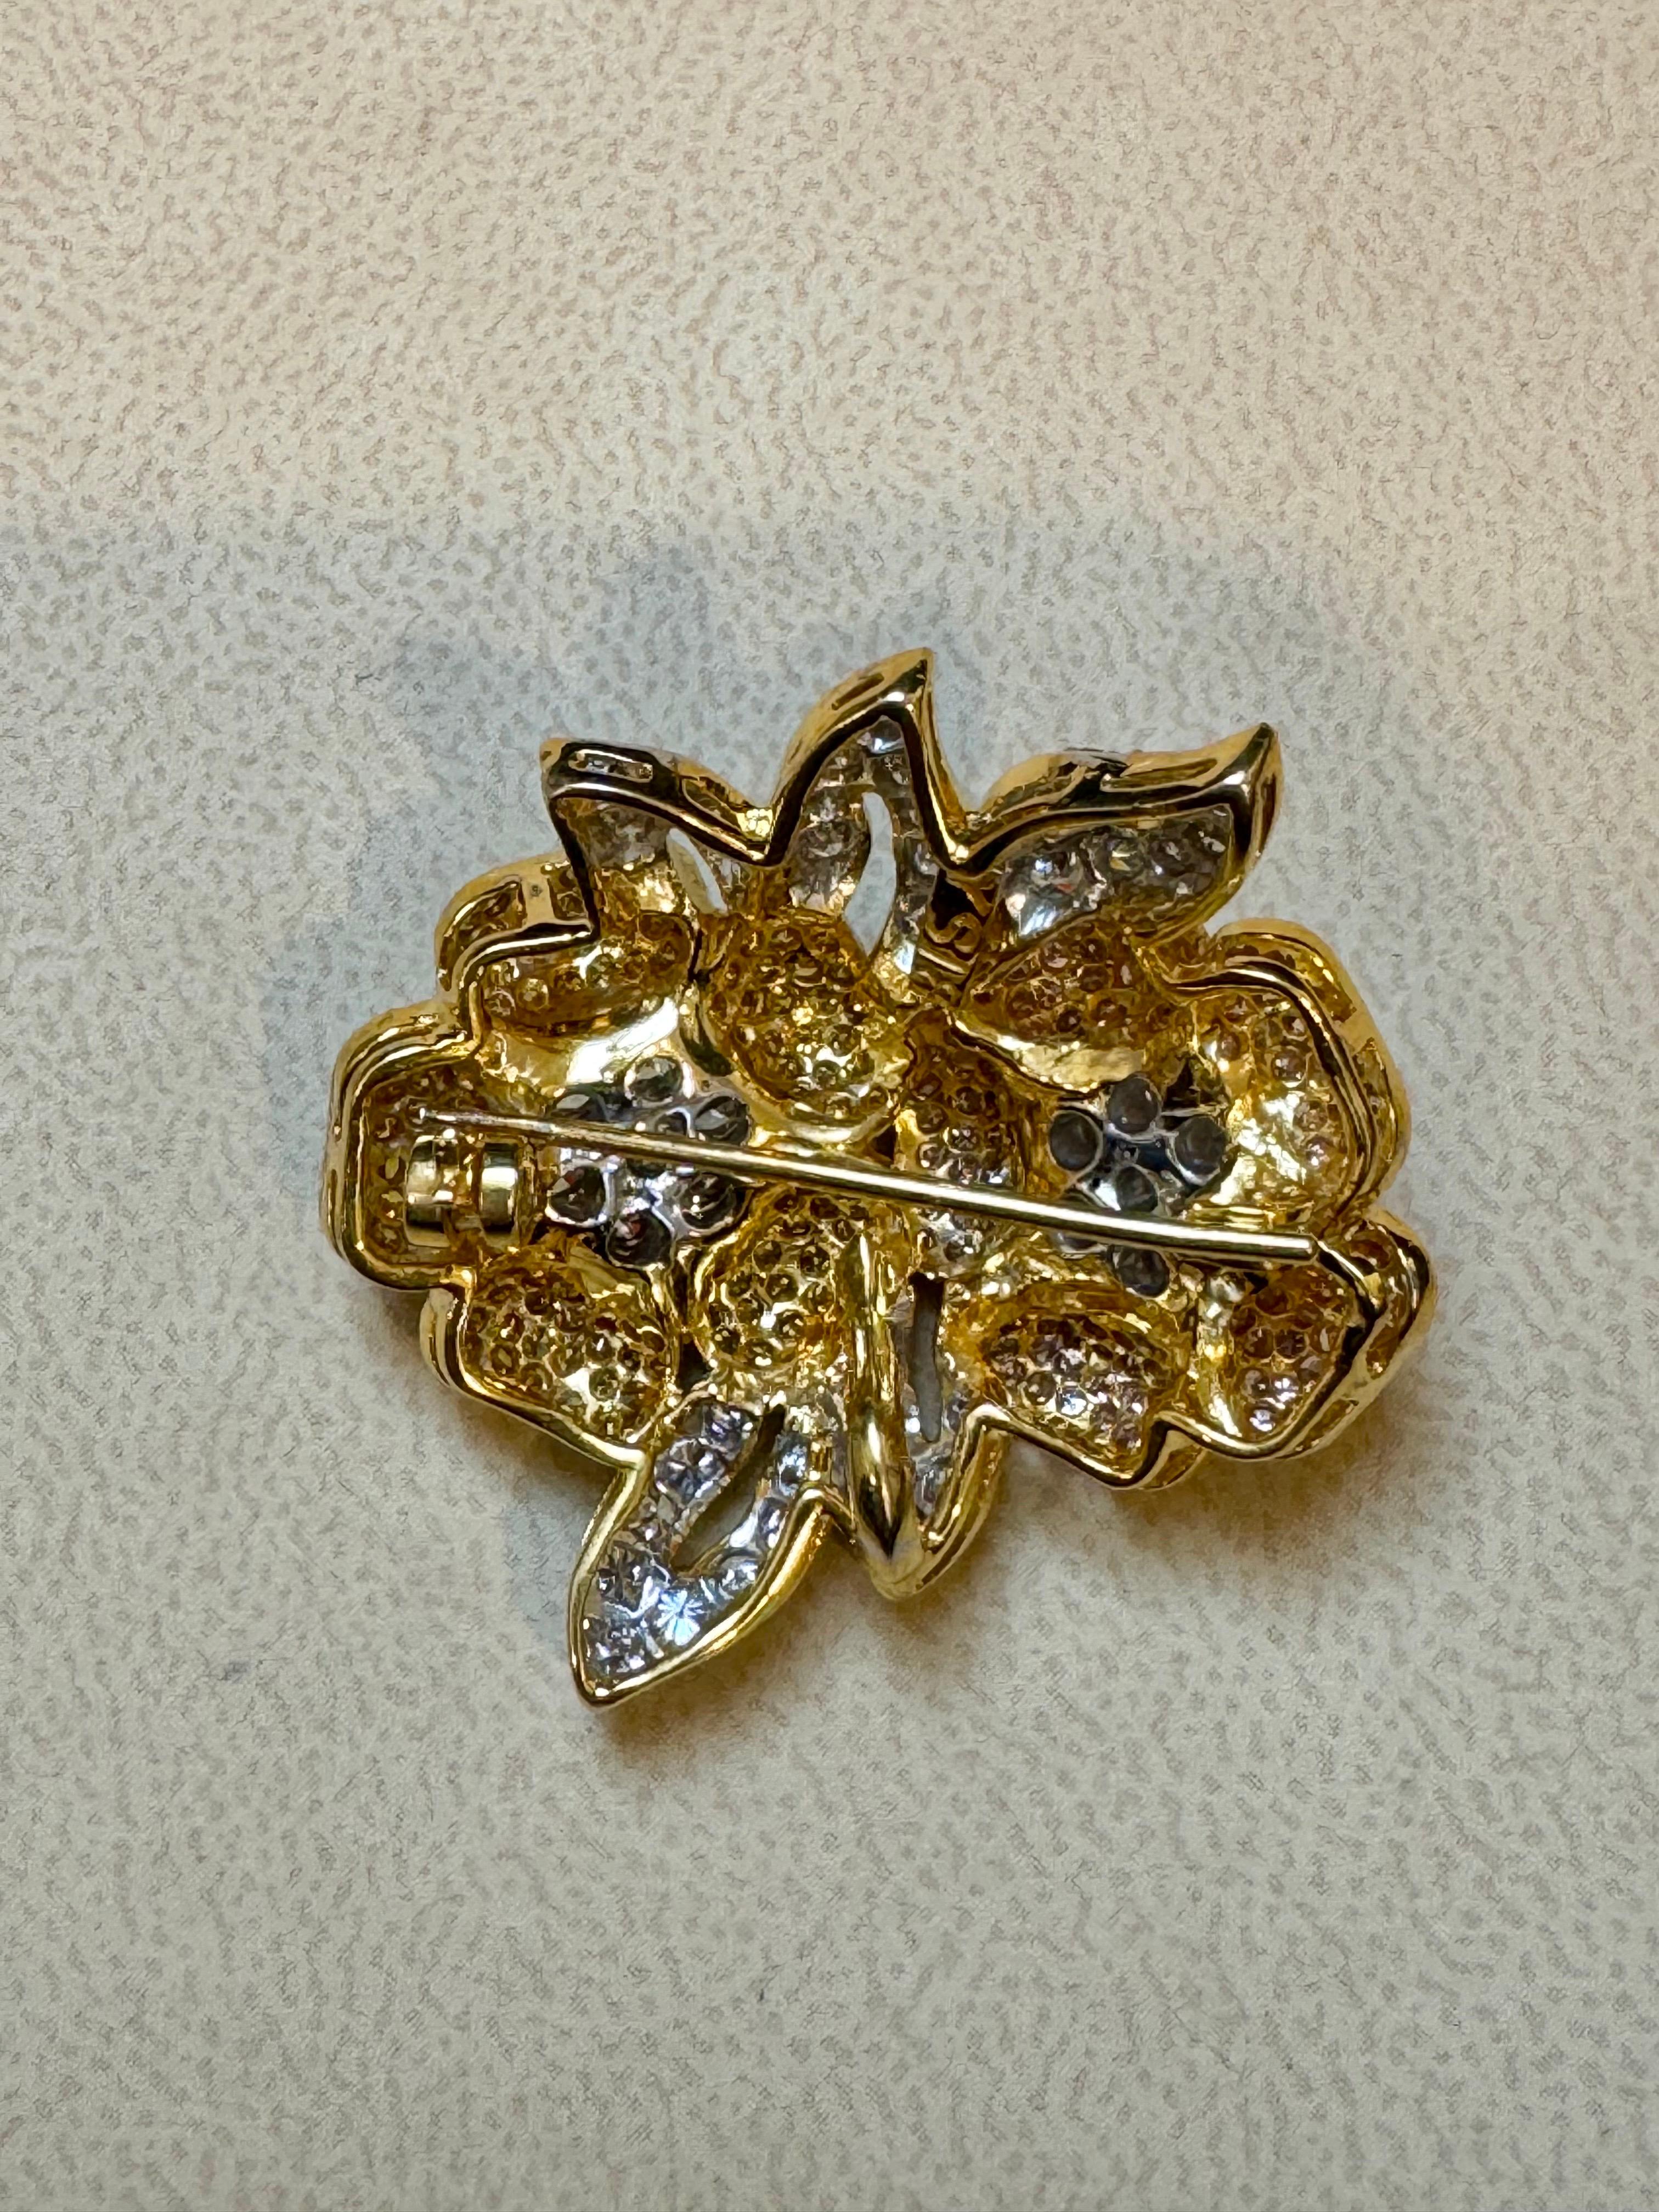 4 Ct Natural Fancy Color Diamond Flower Pin/ Brooch in 18 Kt Multi Color Gold  For Sale 2